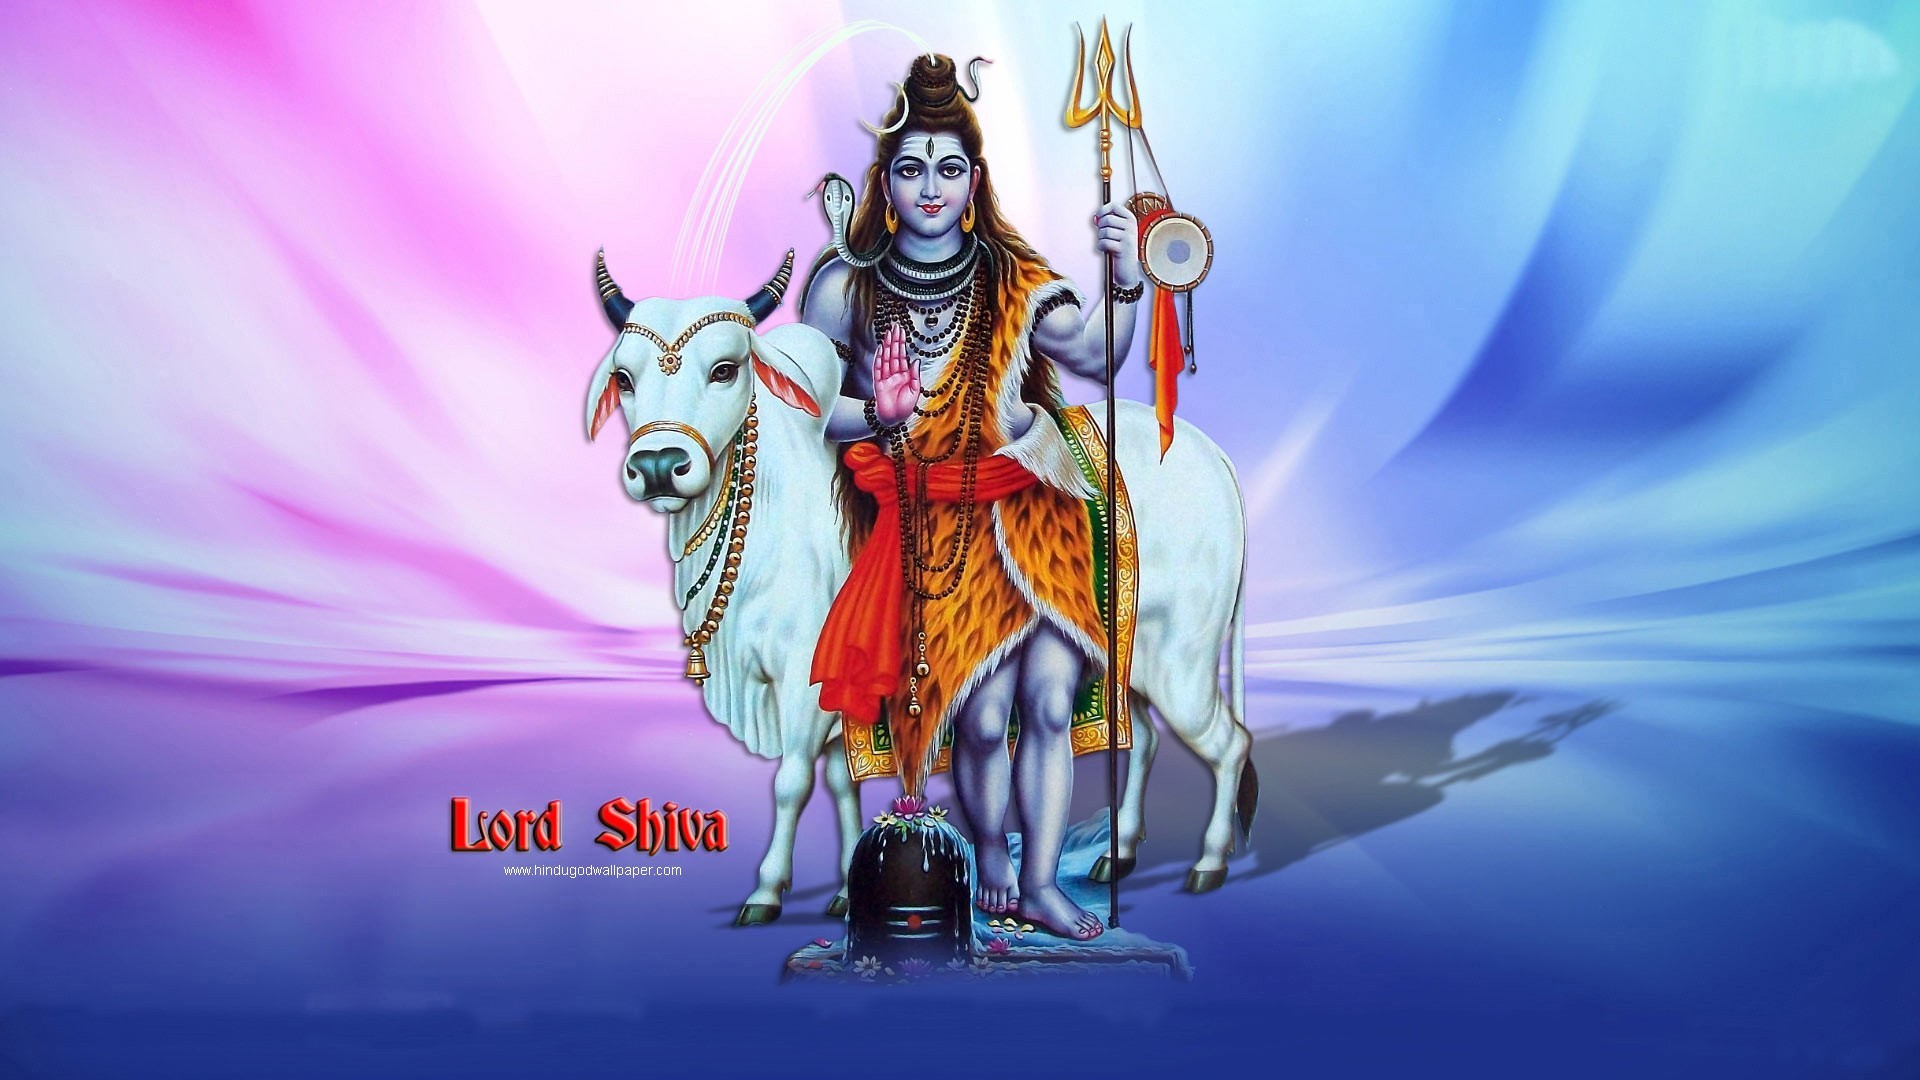 SHIVA HD WALLPAPERS, 1080P PICTURES, IMAGES HD